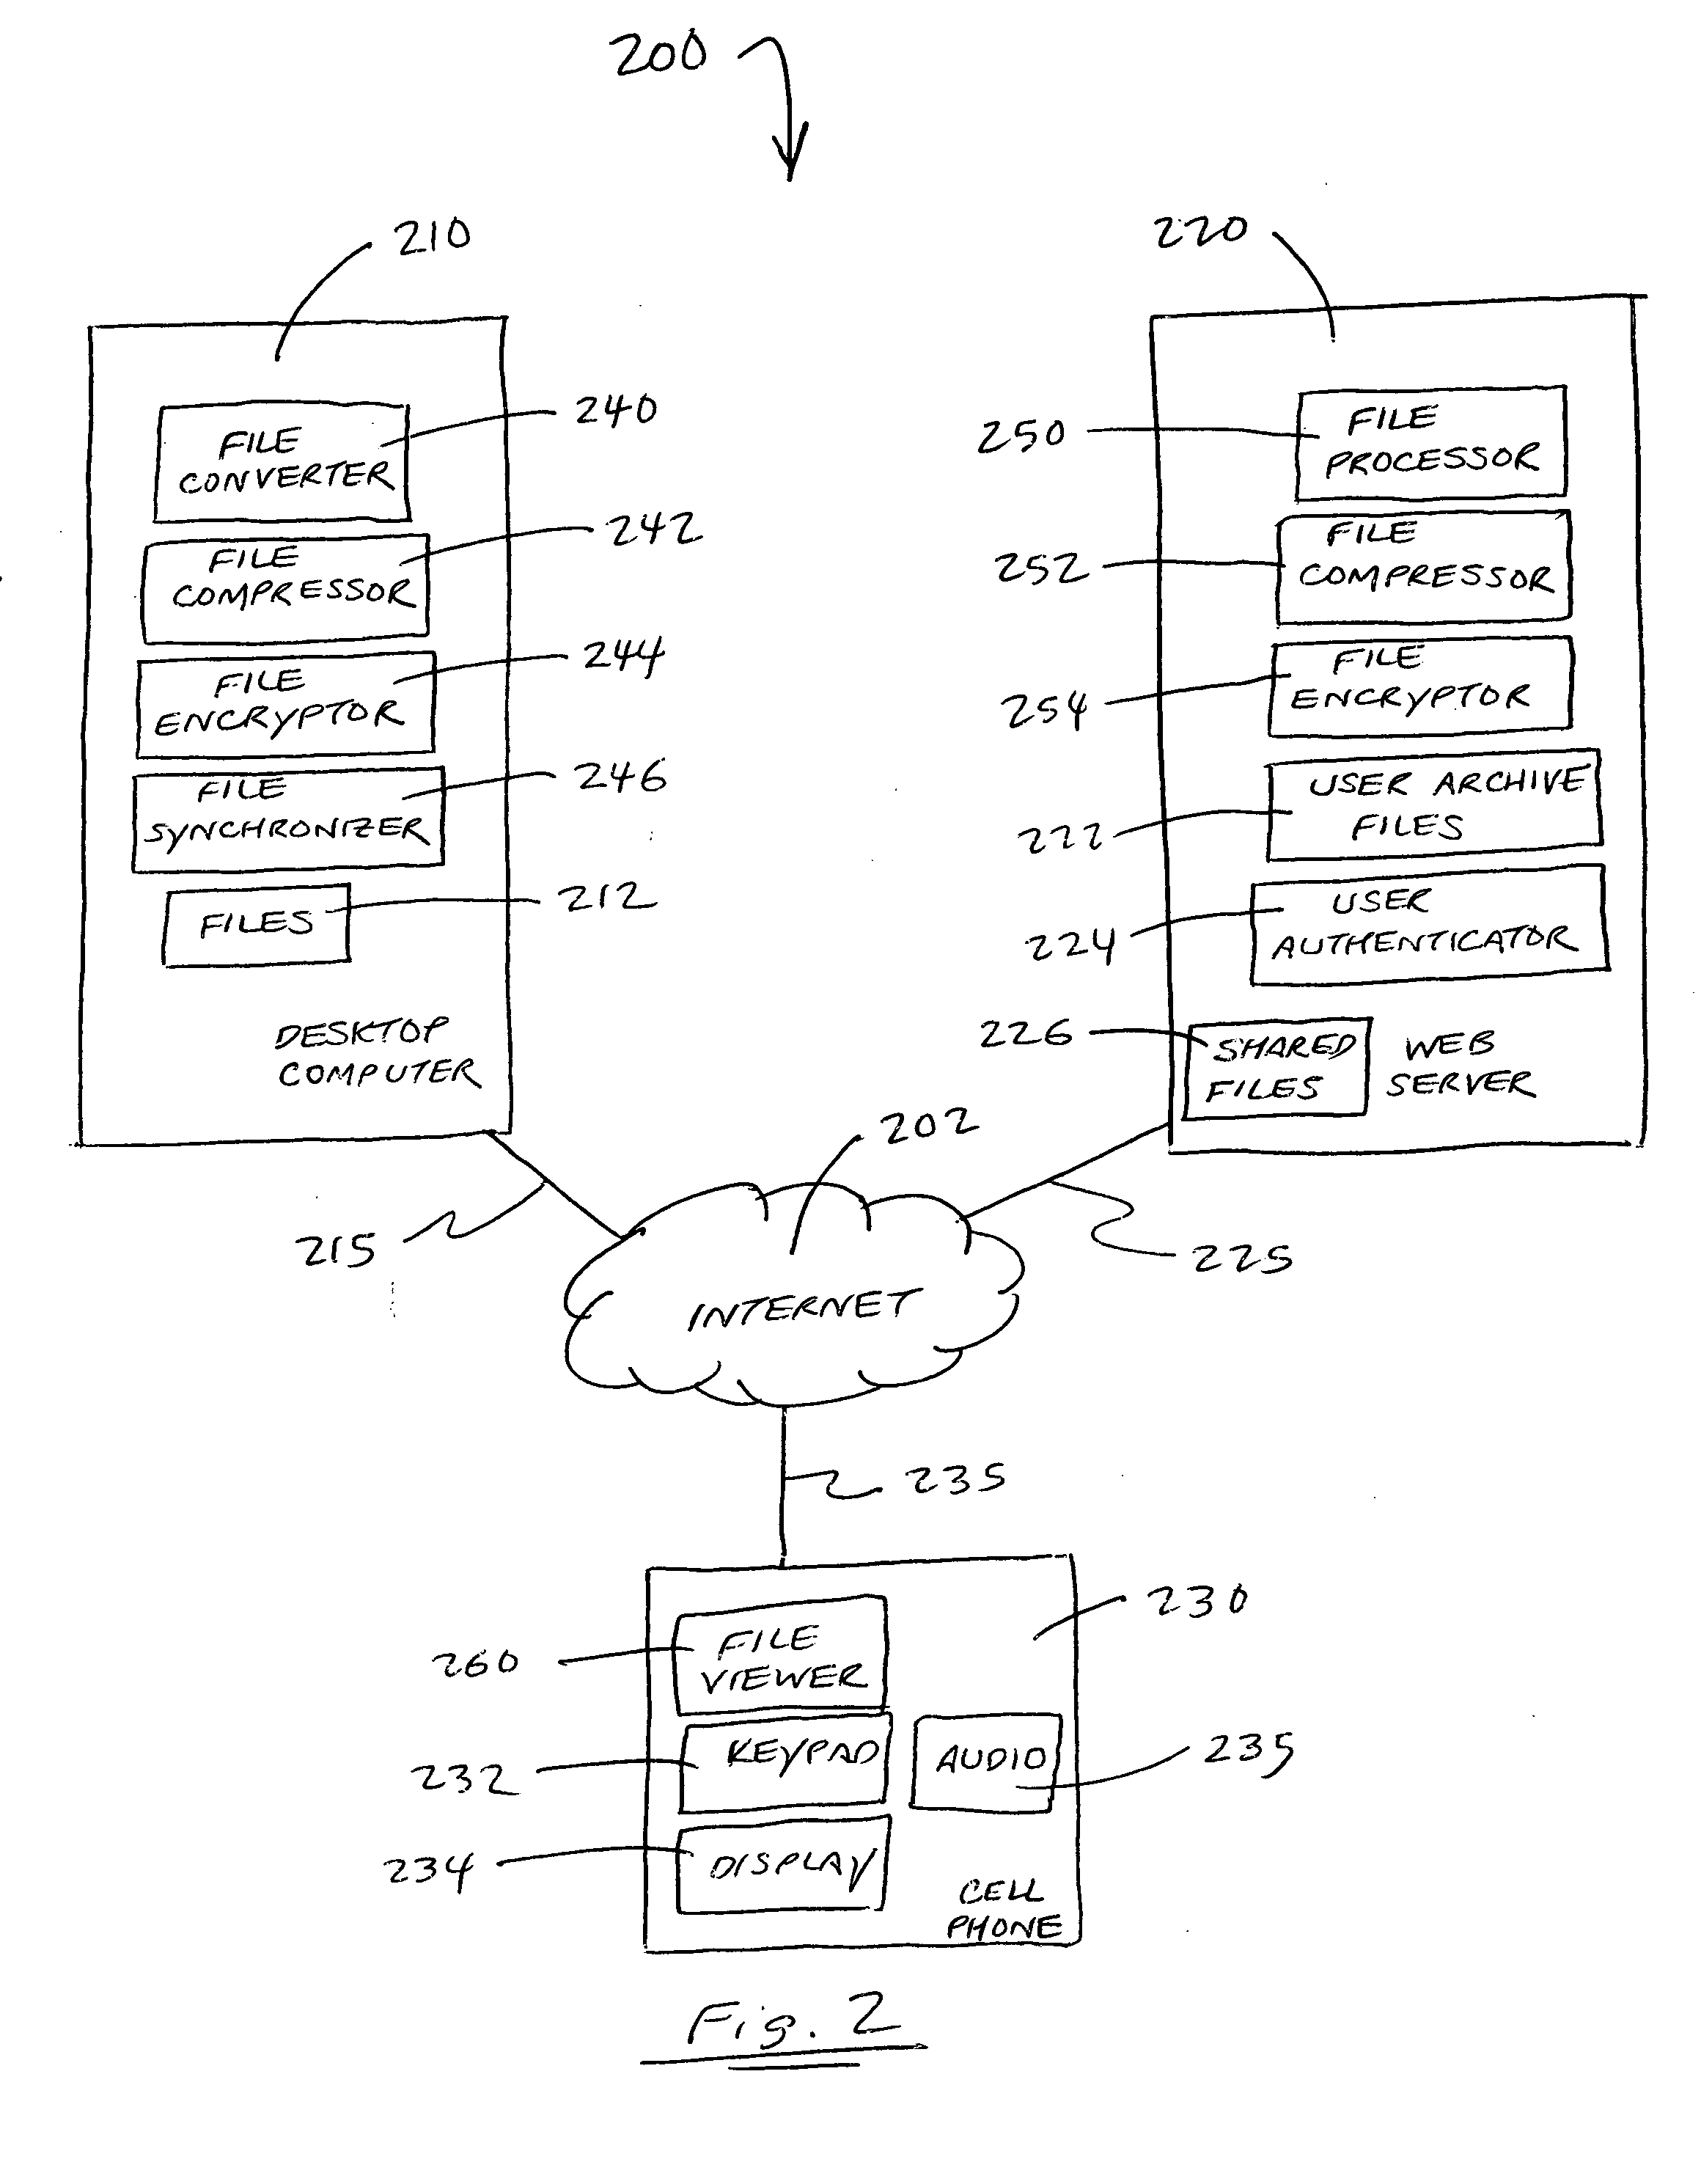 Method and system for accessing and viewing files on mobile devices